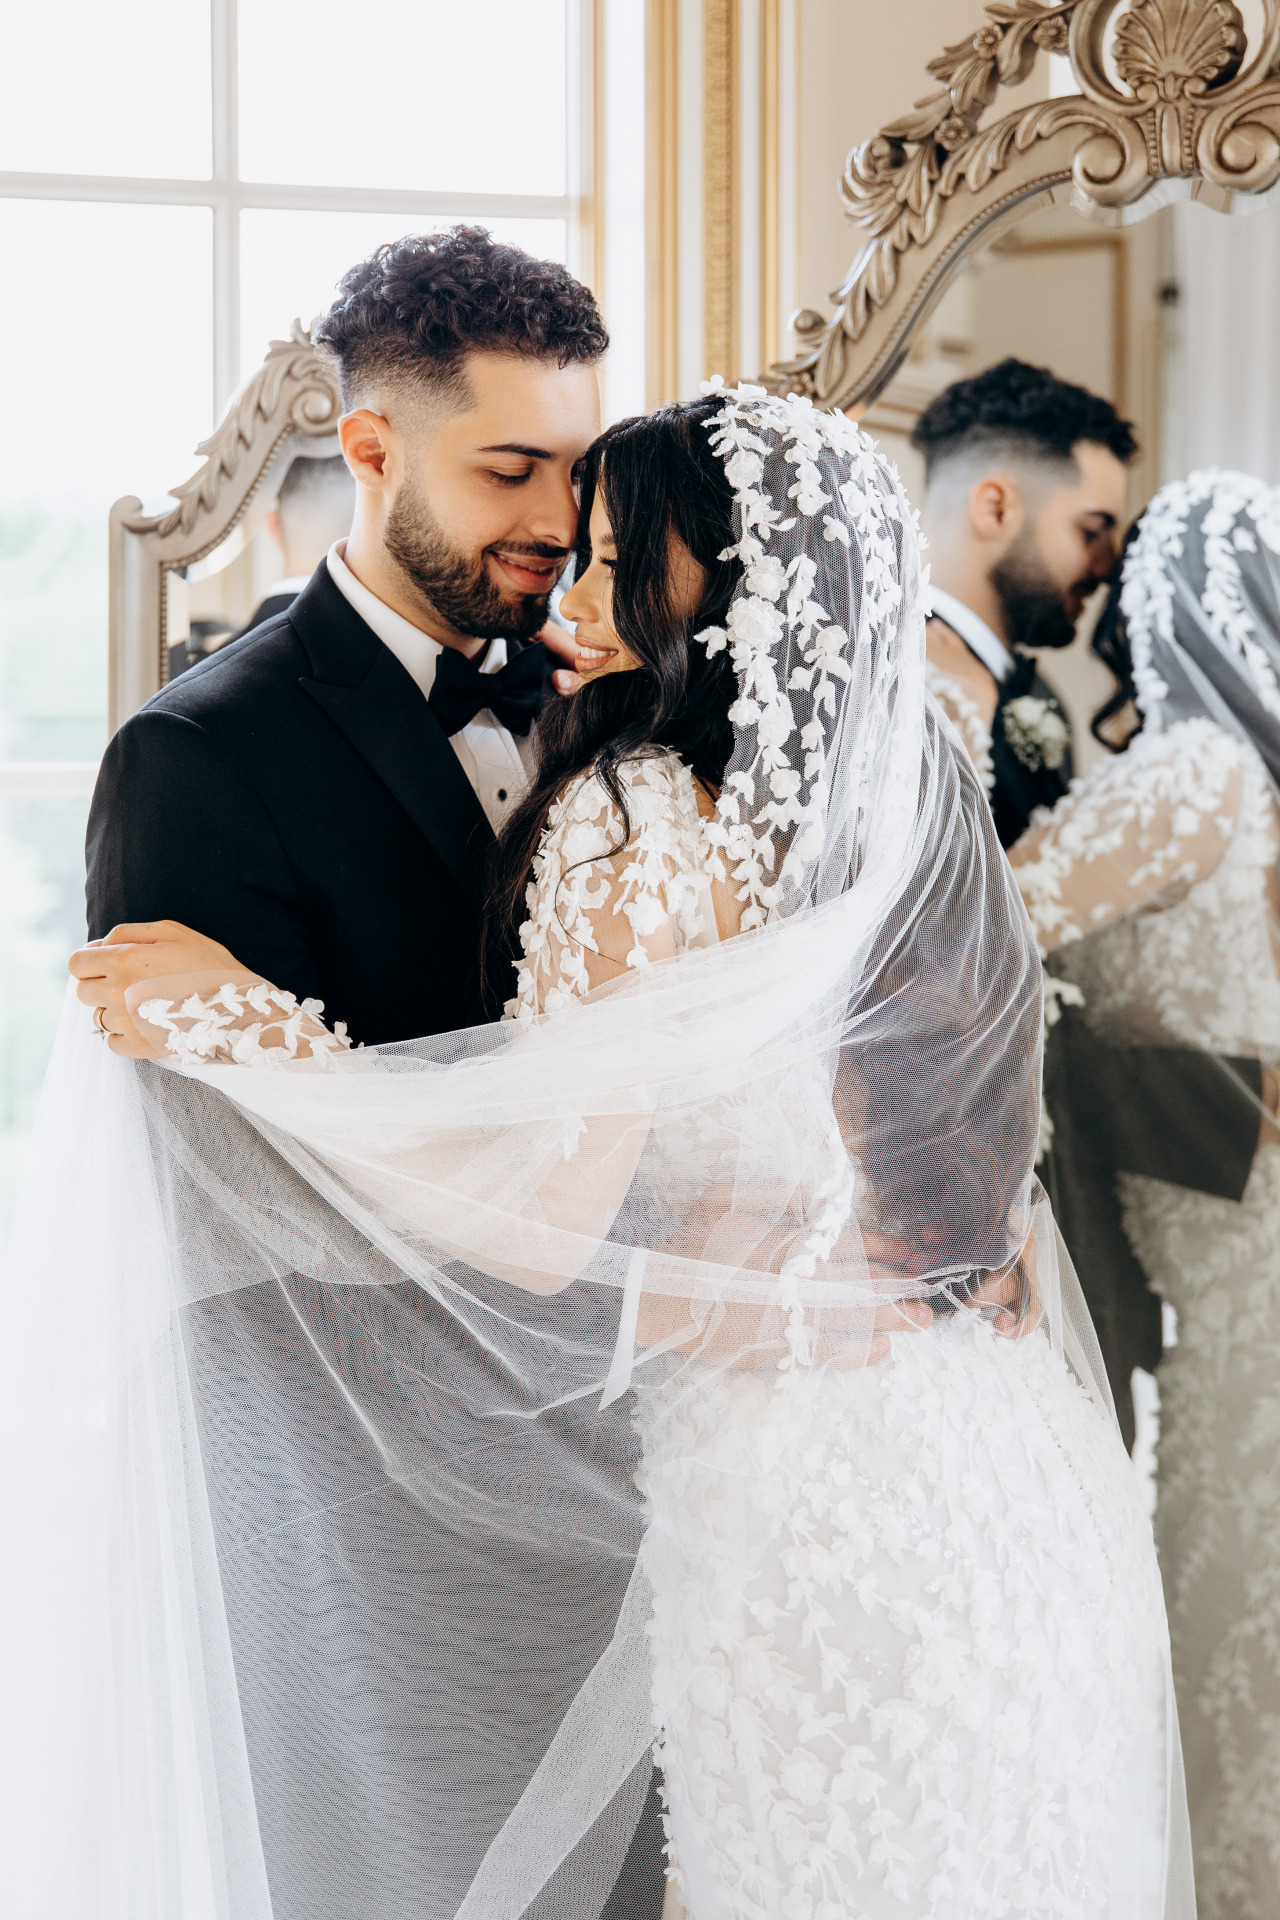 Egyprian coptic wedding editorial style in New Jersey 72